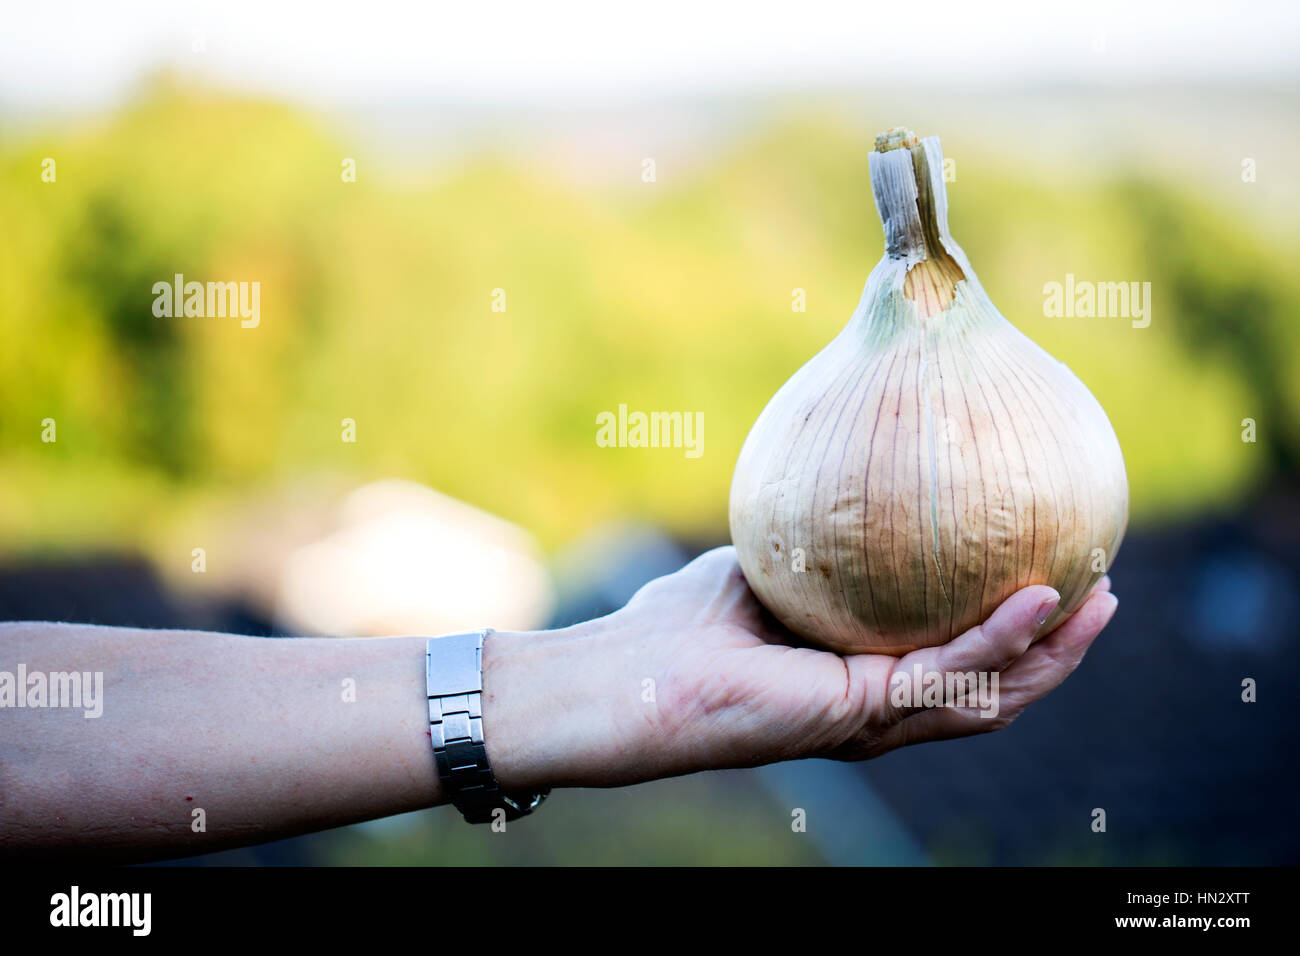 A woman holds a large home grown brown onion, Allium cepa, in the palm of her hand. The bulb vegetable has been grown in the woman’s garden Stock Photo